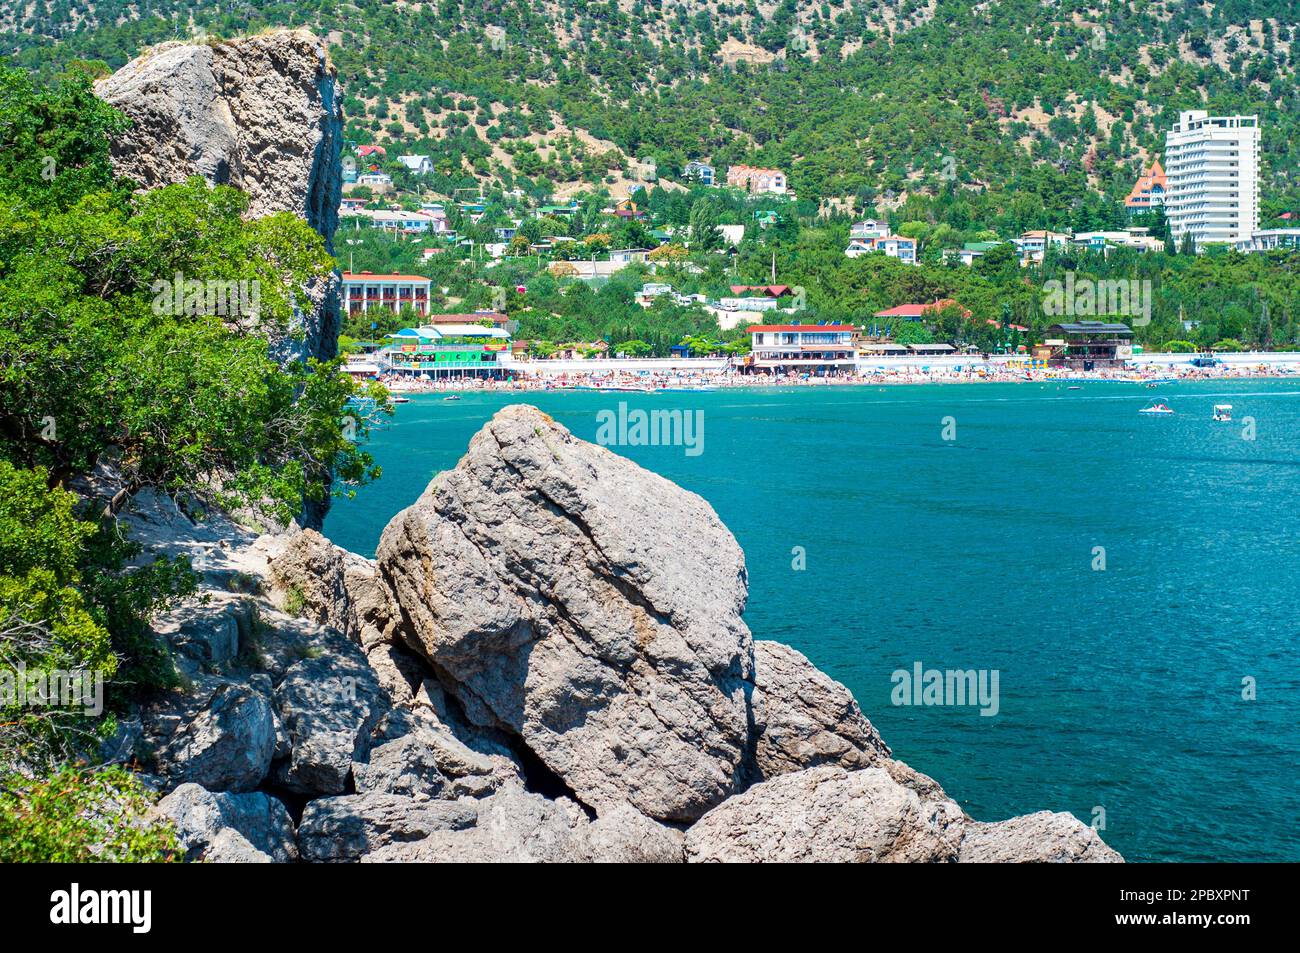 A rocky shore above the sea and a resort town with a beach in the background. Rest in Crimea, Ukraine Stock Photo